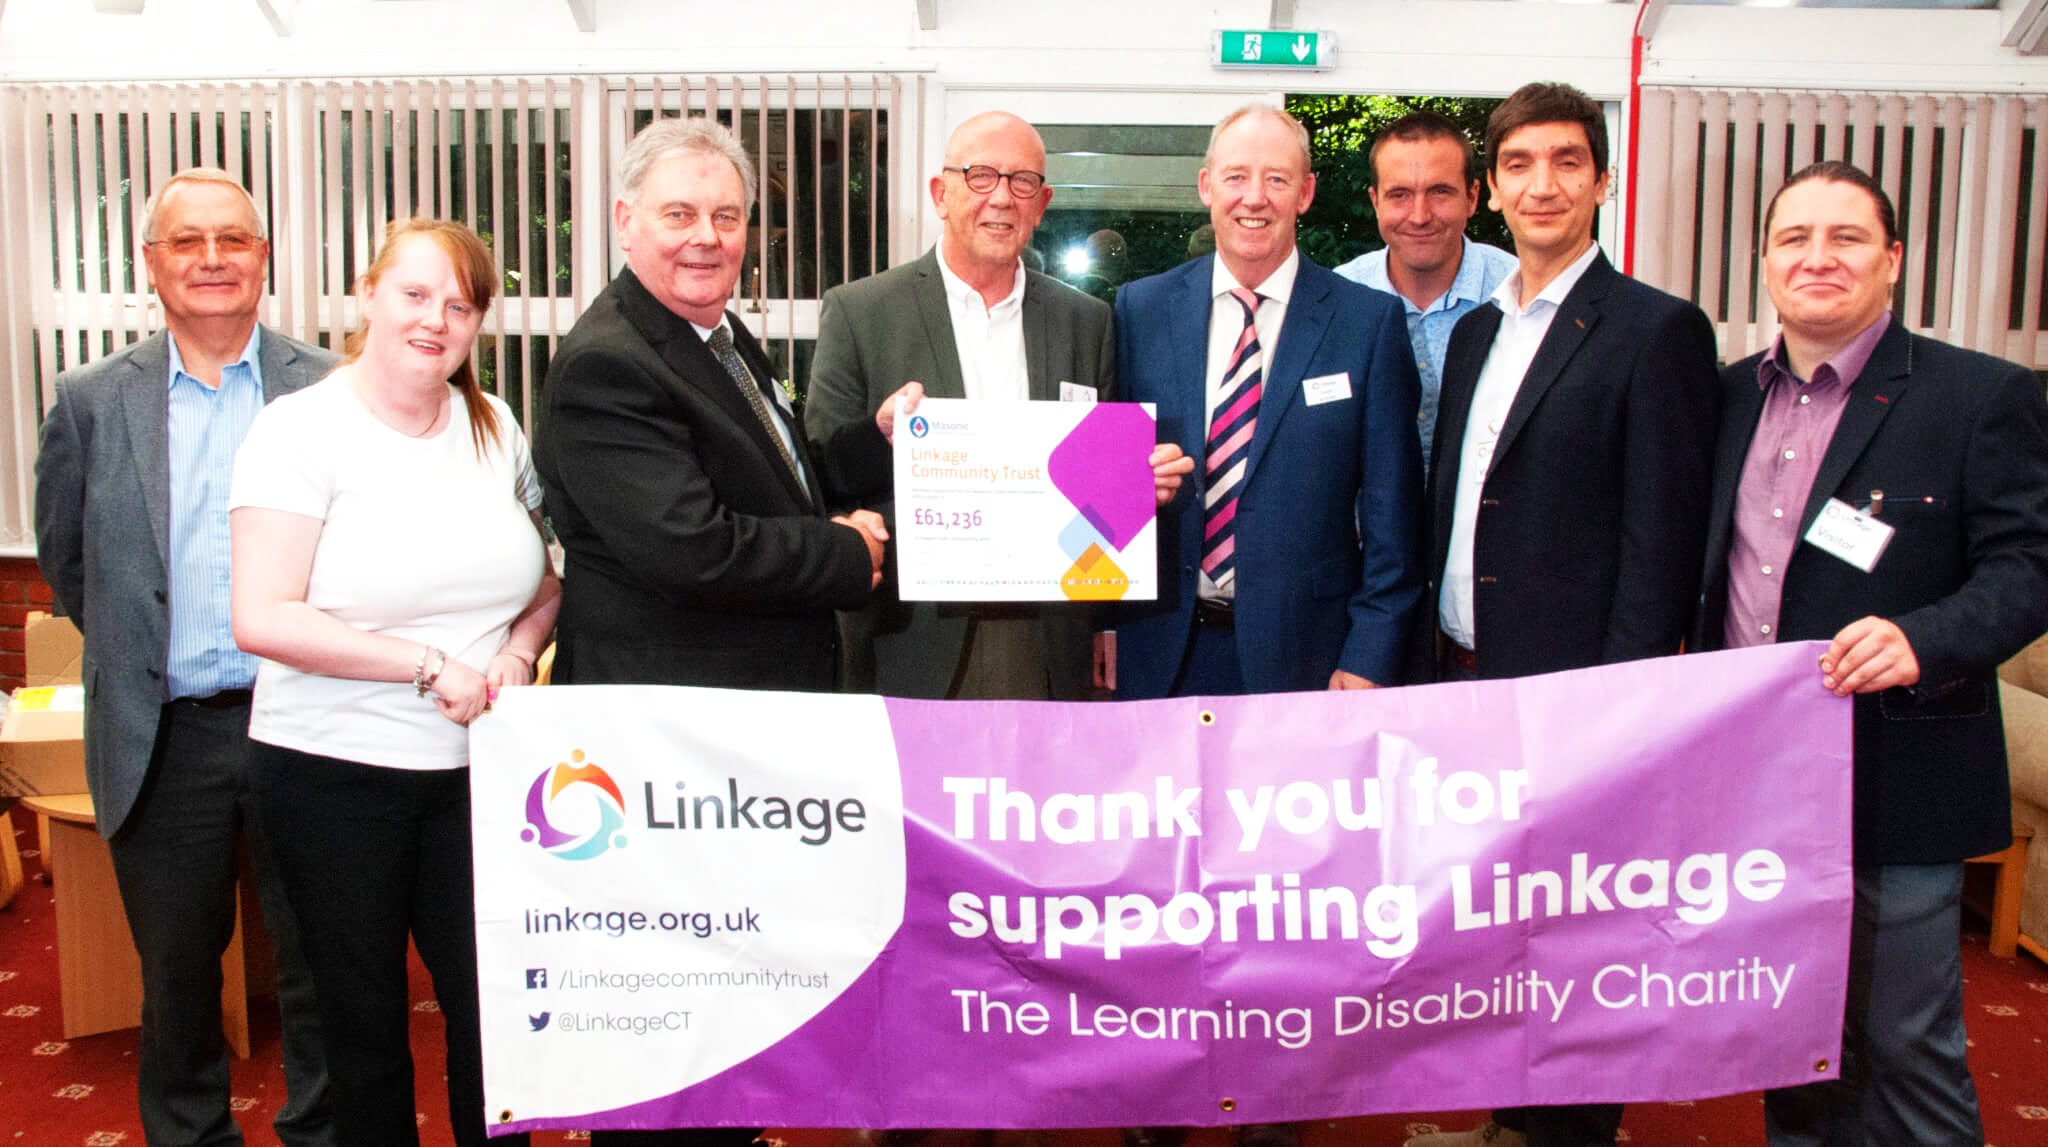 Freemasons donate £61,000 to help people with learning disabilities to get into work